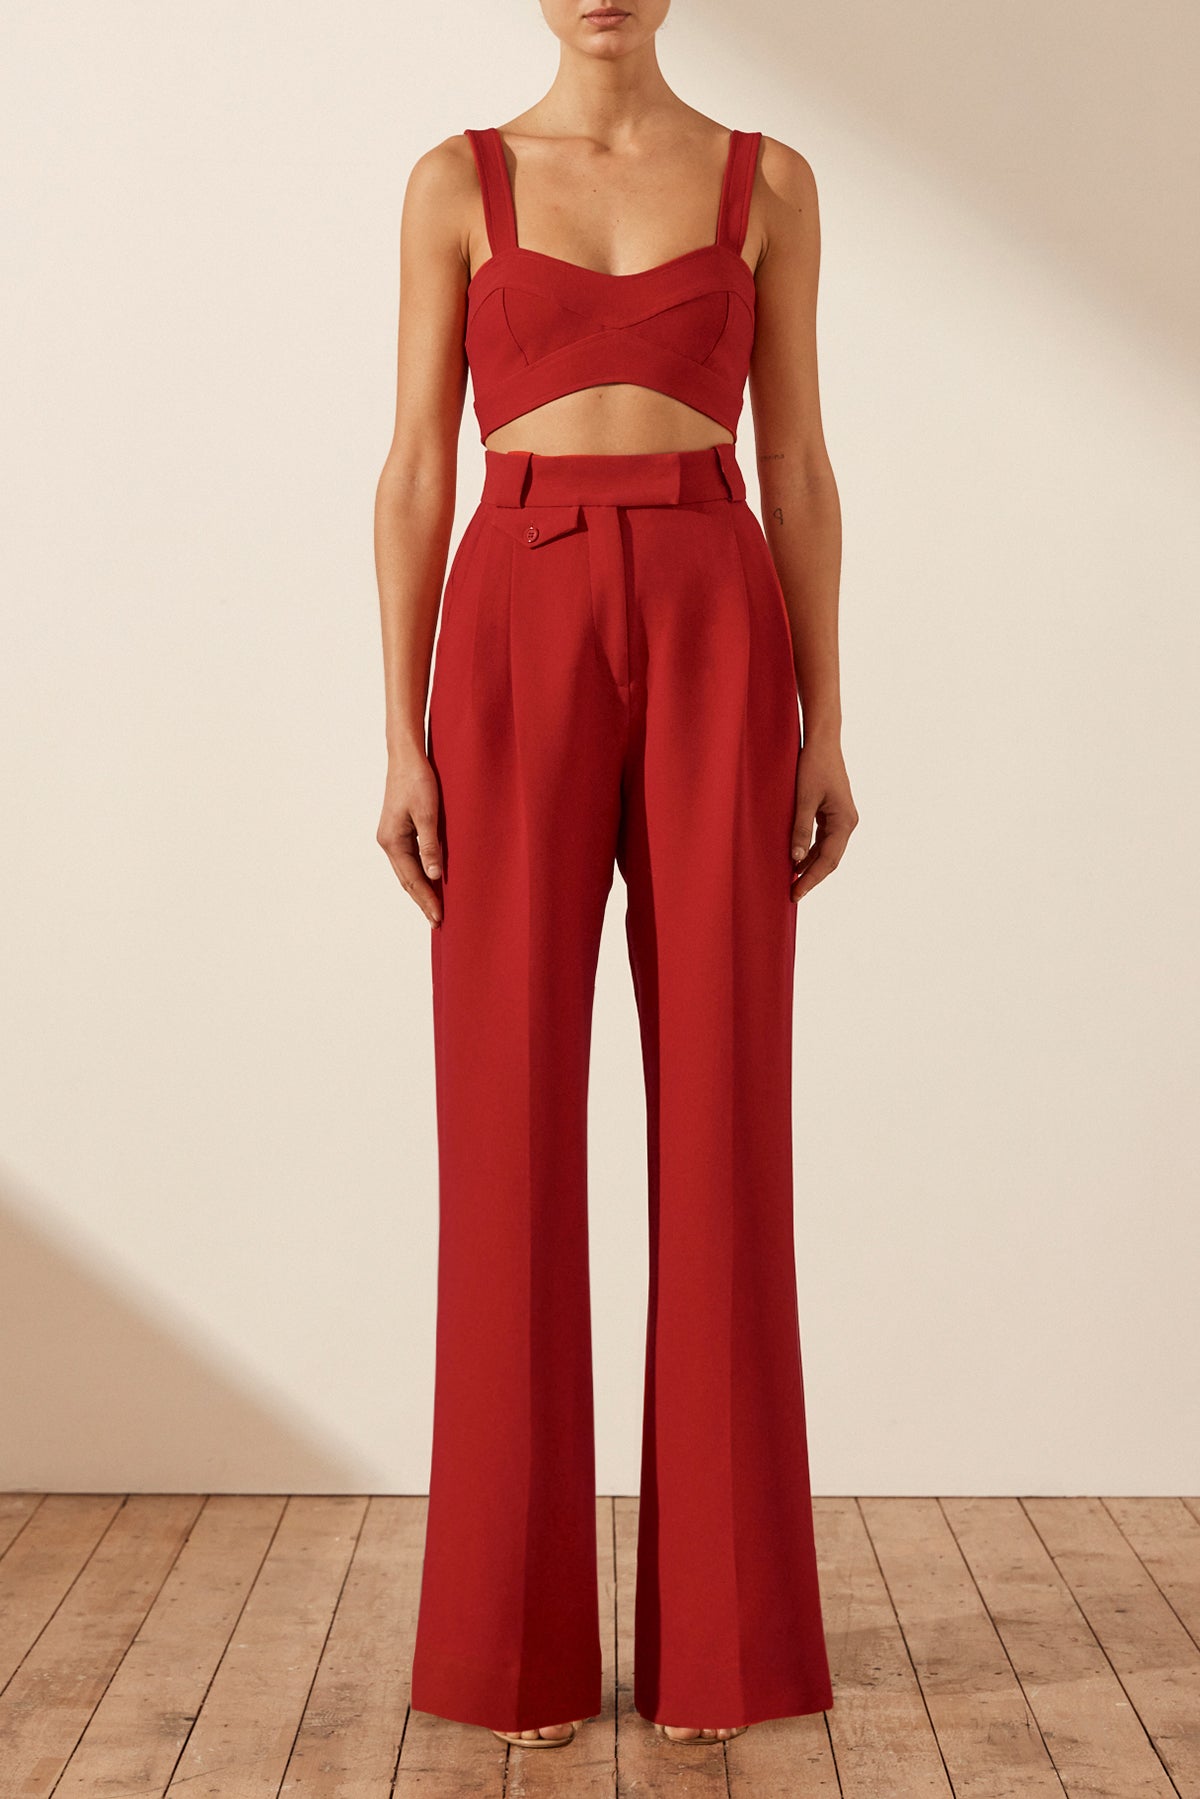 SHONA JOY ANGELICA HIGH WAISTED TAILORED PANT - ROUGE - Pants & Jumpsuits